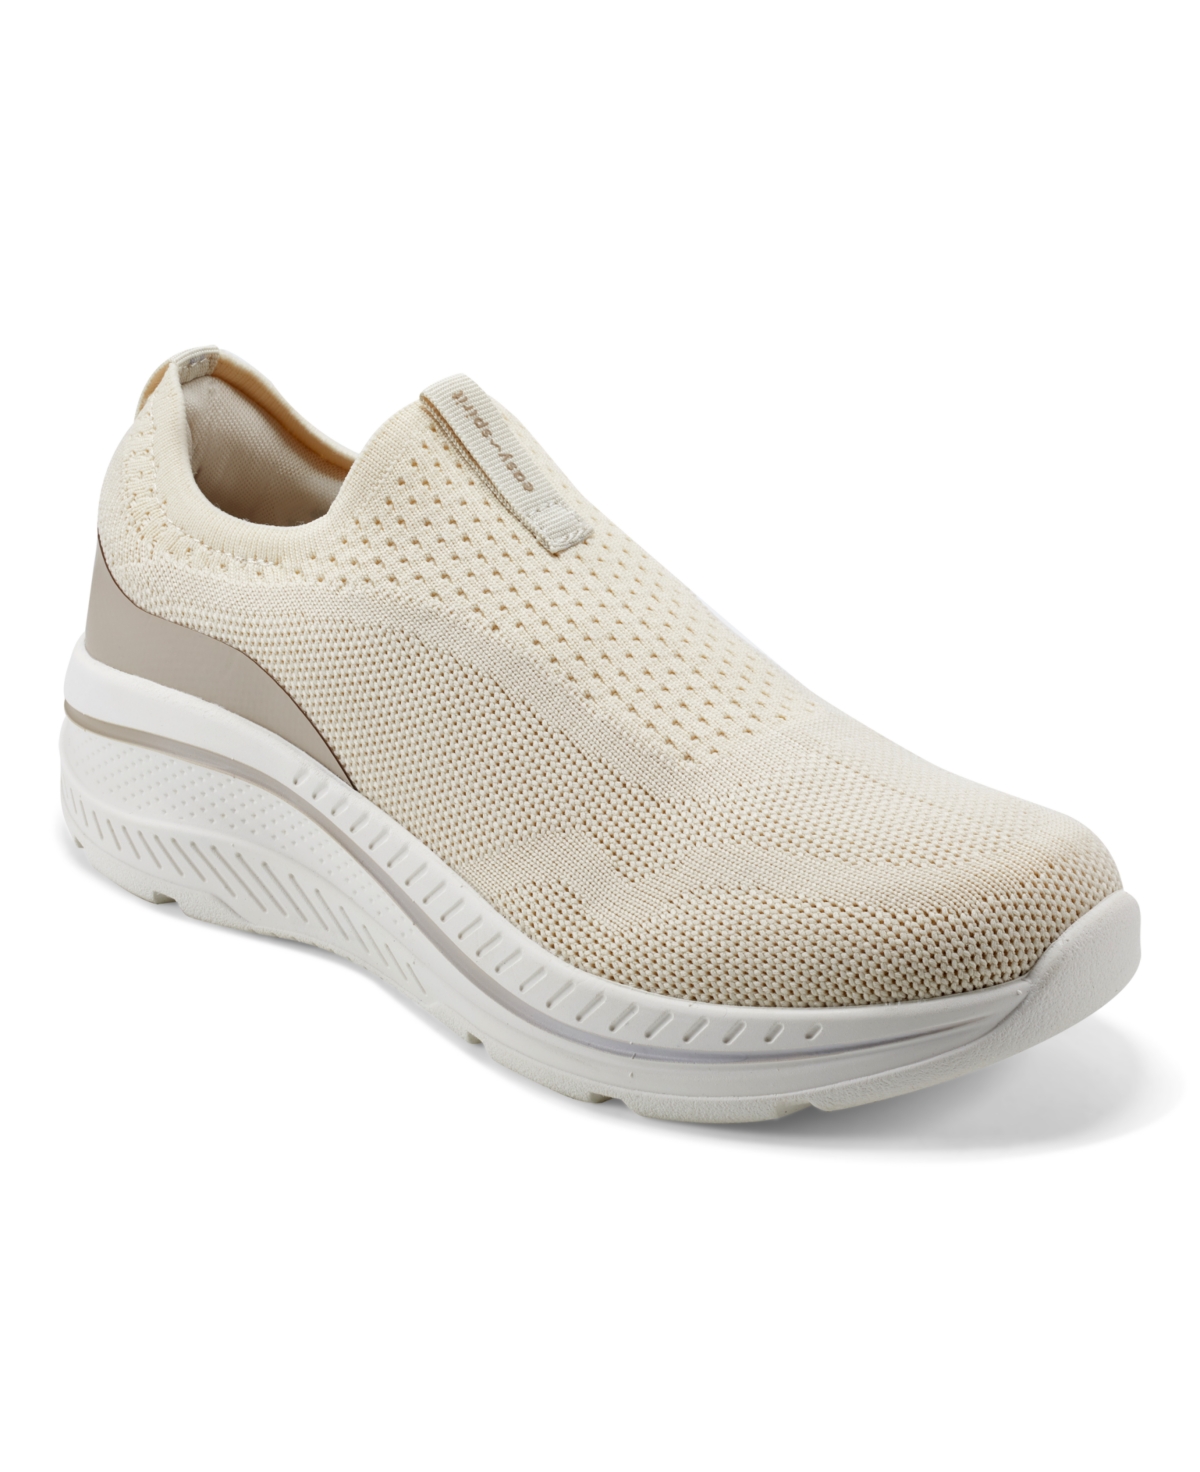 Women's Parks Slip-On Round Toe Casual Sneakers - Light Natural